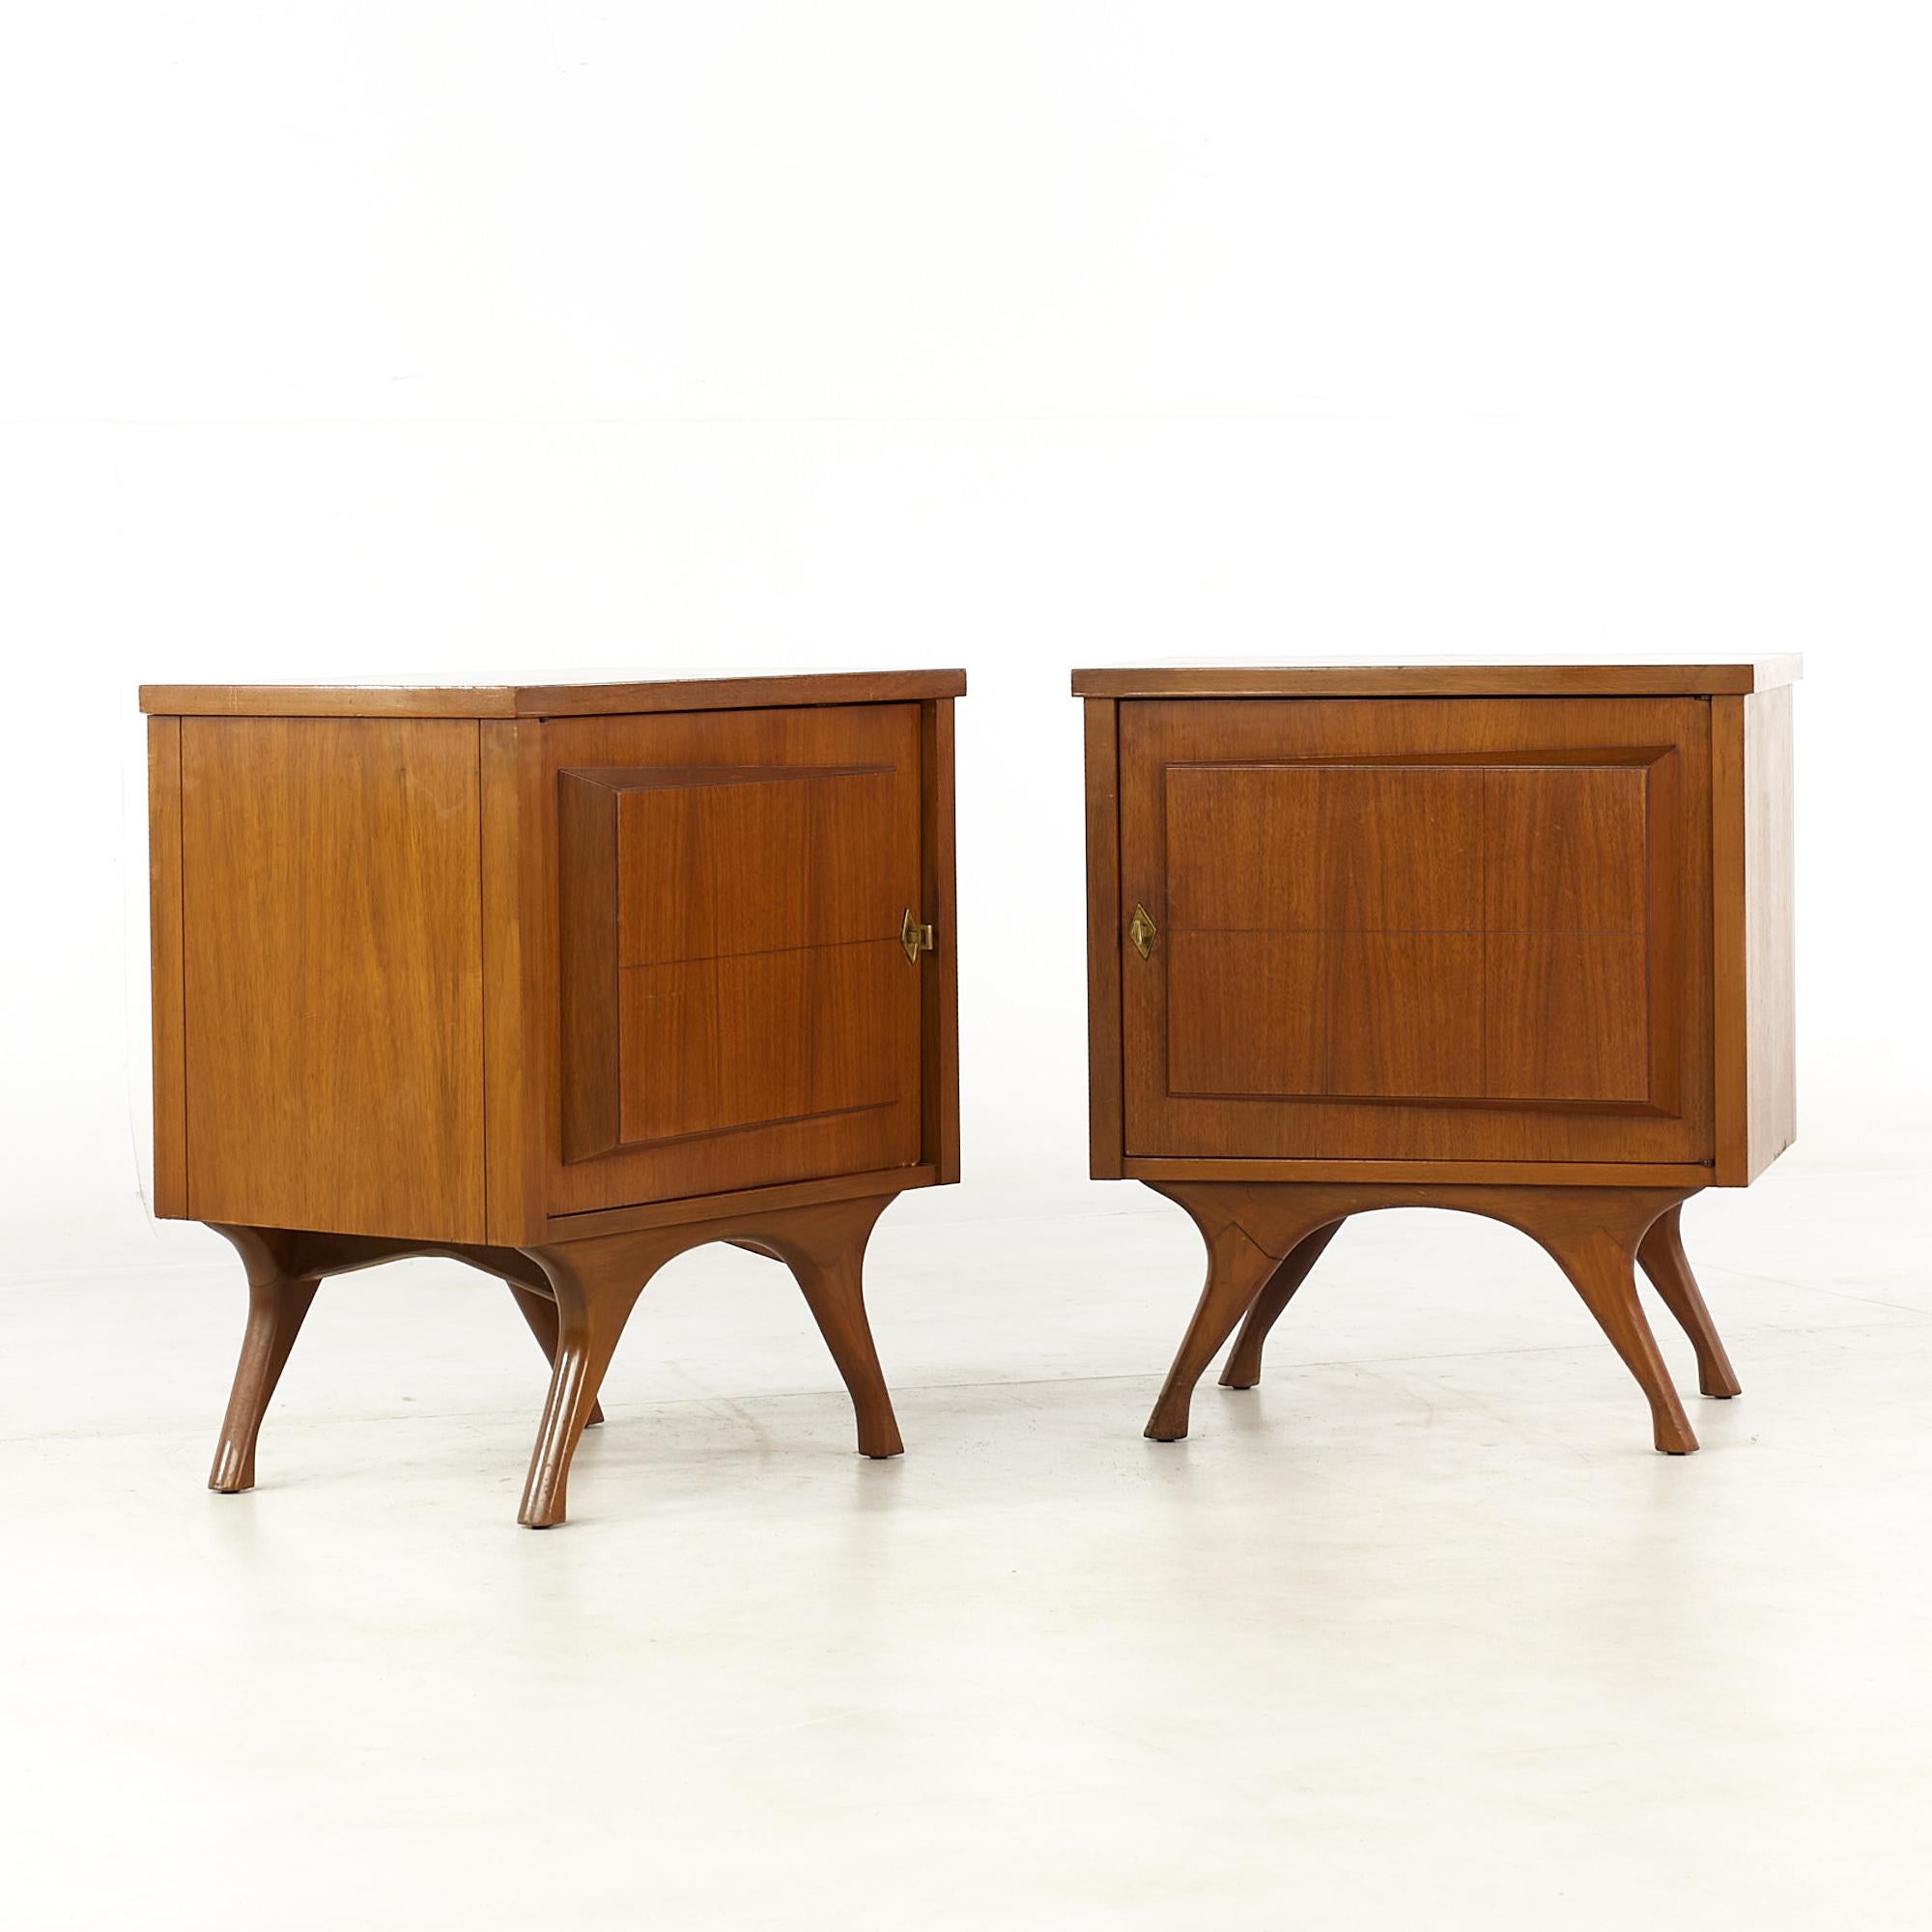 Kagan Style Mid Century walnut nightstands, Pair

Each nightstand measures: 23.25 wide x 16.25 deep x 26.5 inches high

All pieces of furniture can be had in what we call restored vintage condition. That means the piece is restored upon purchase so